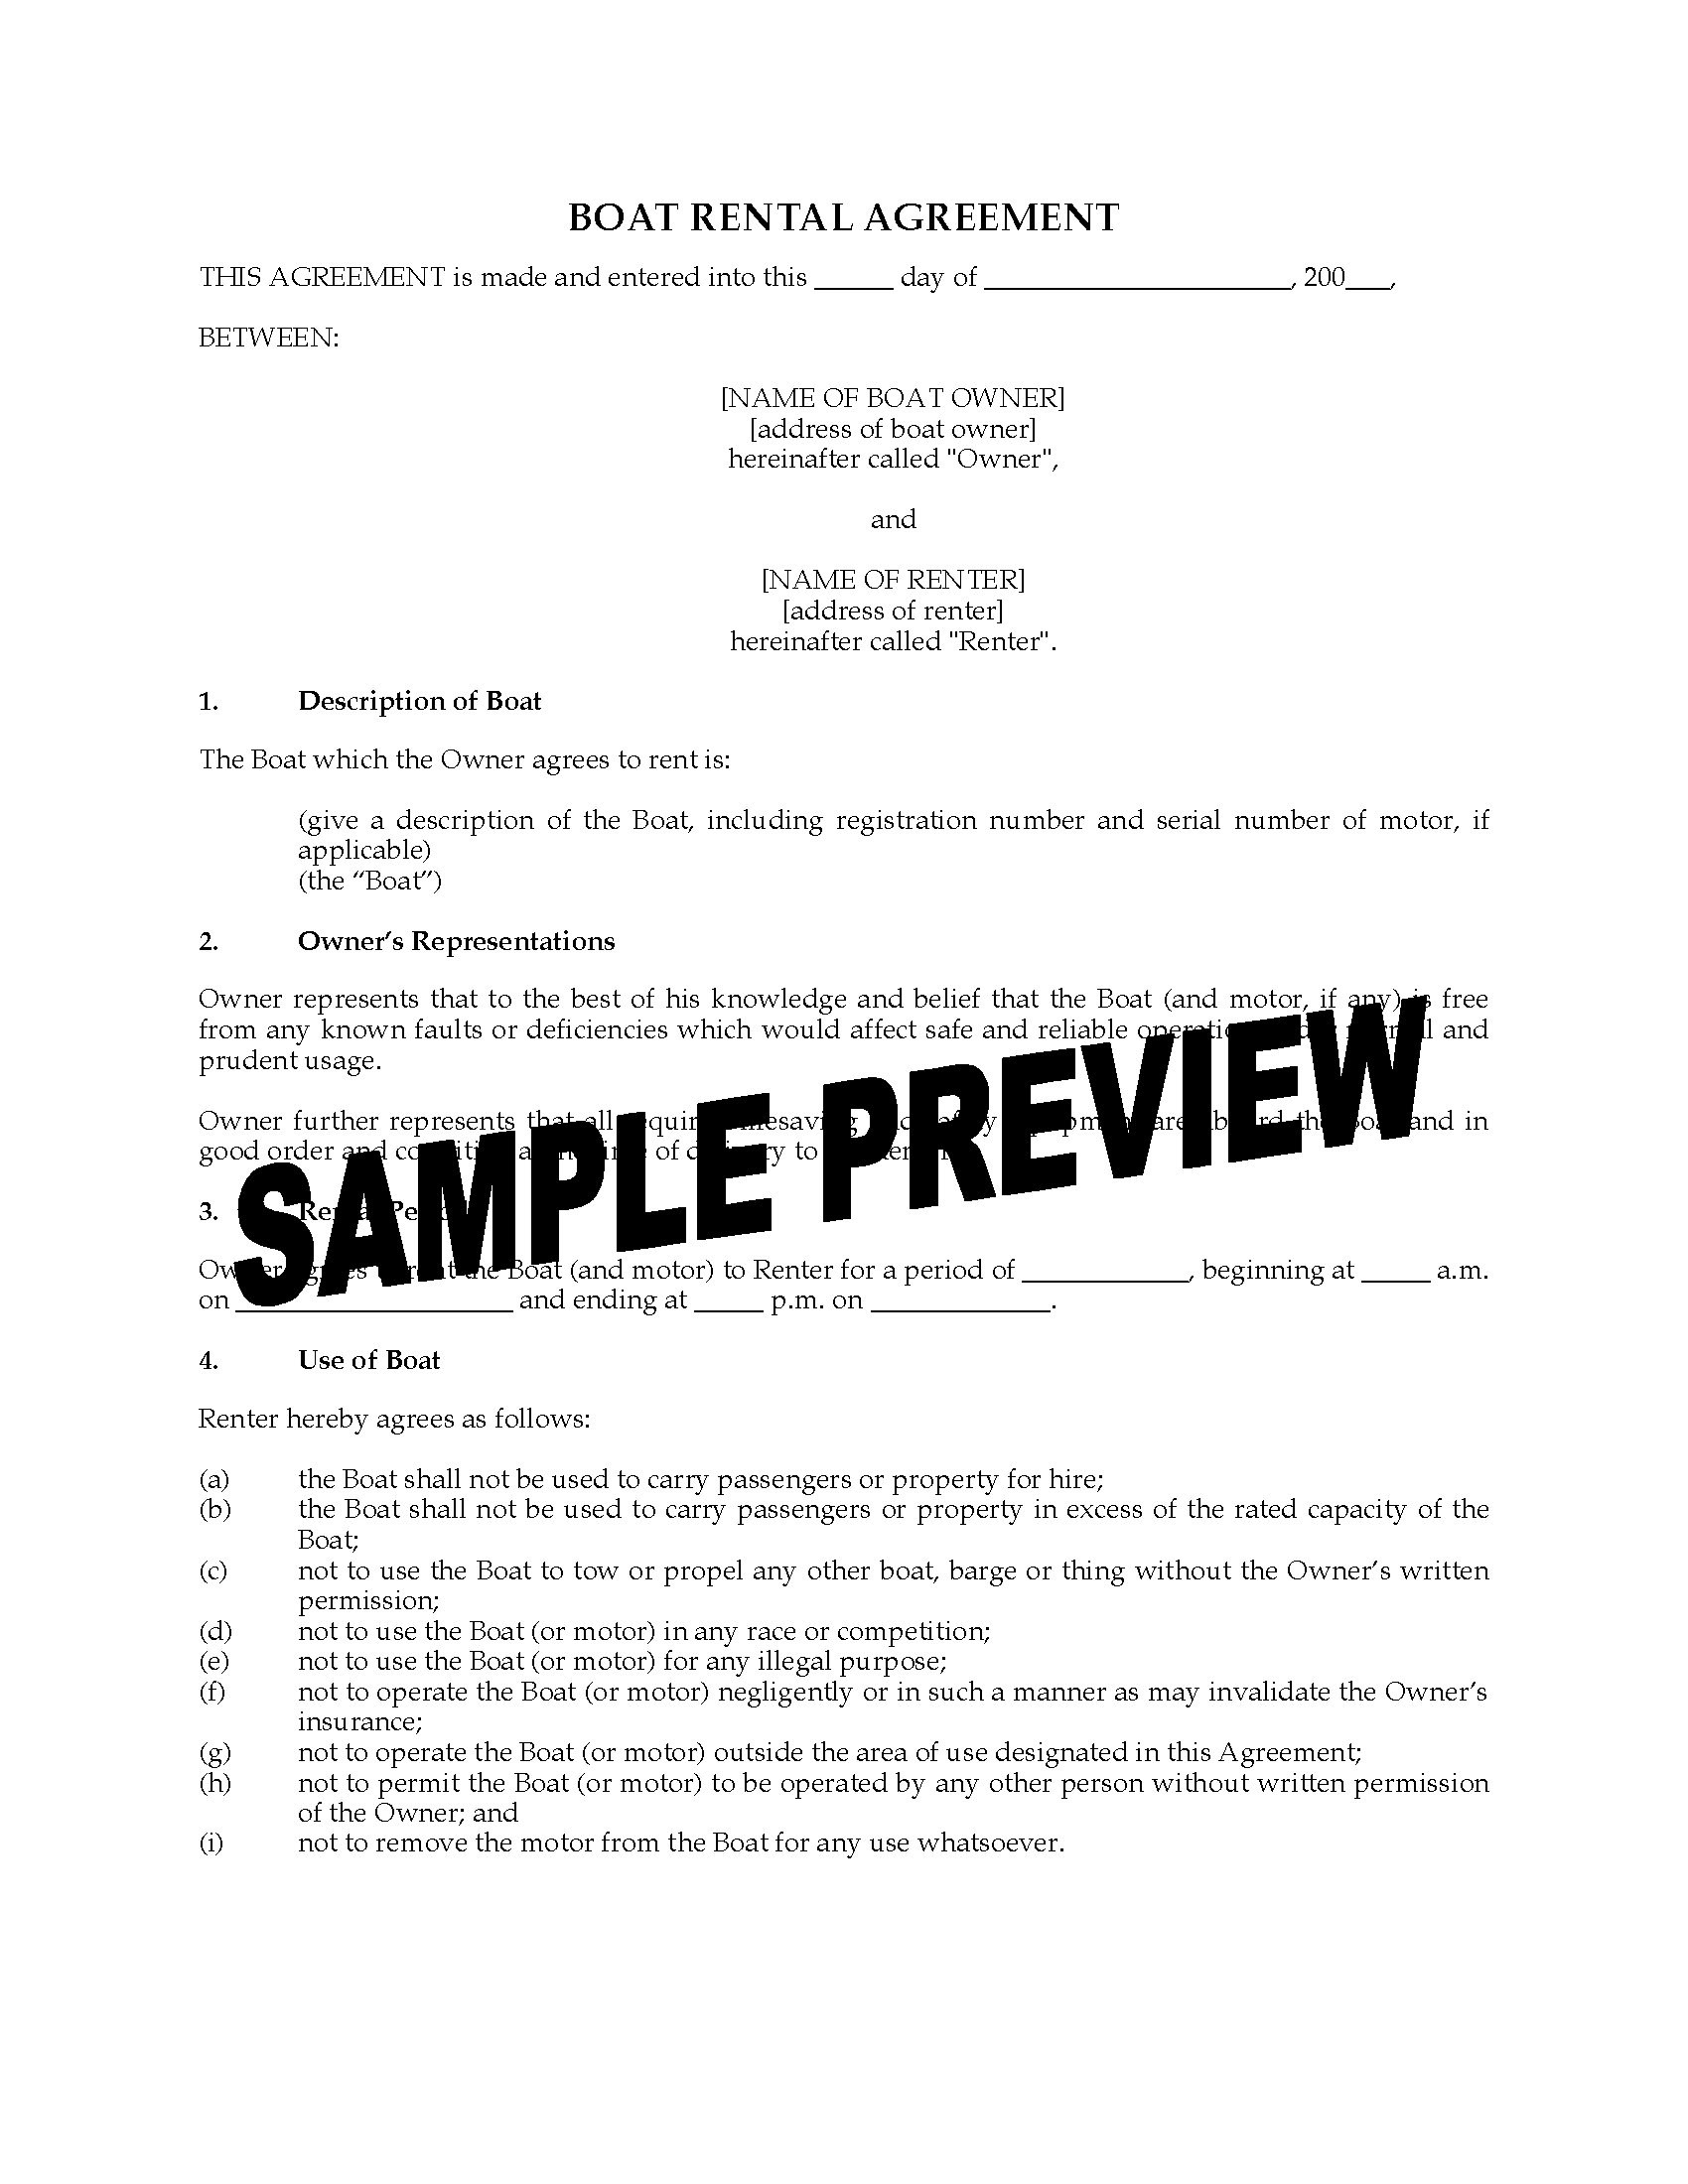 USA Boat Rental Agreement Legal Forms And Business S Document